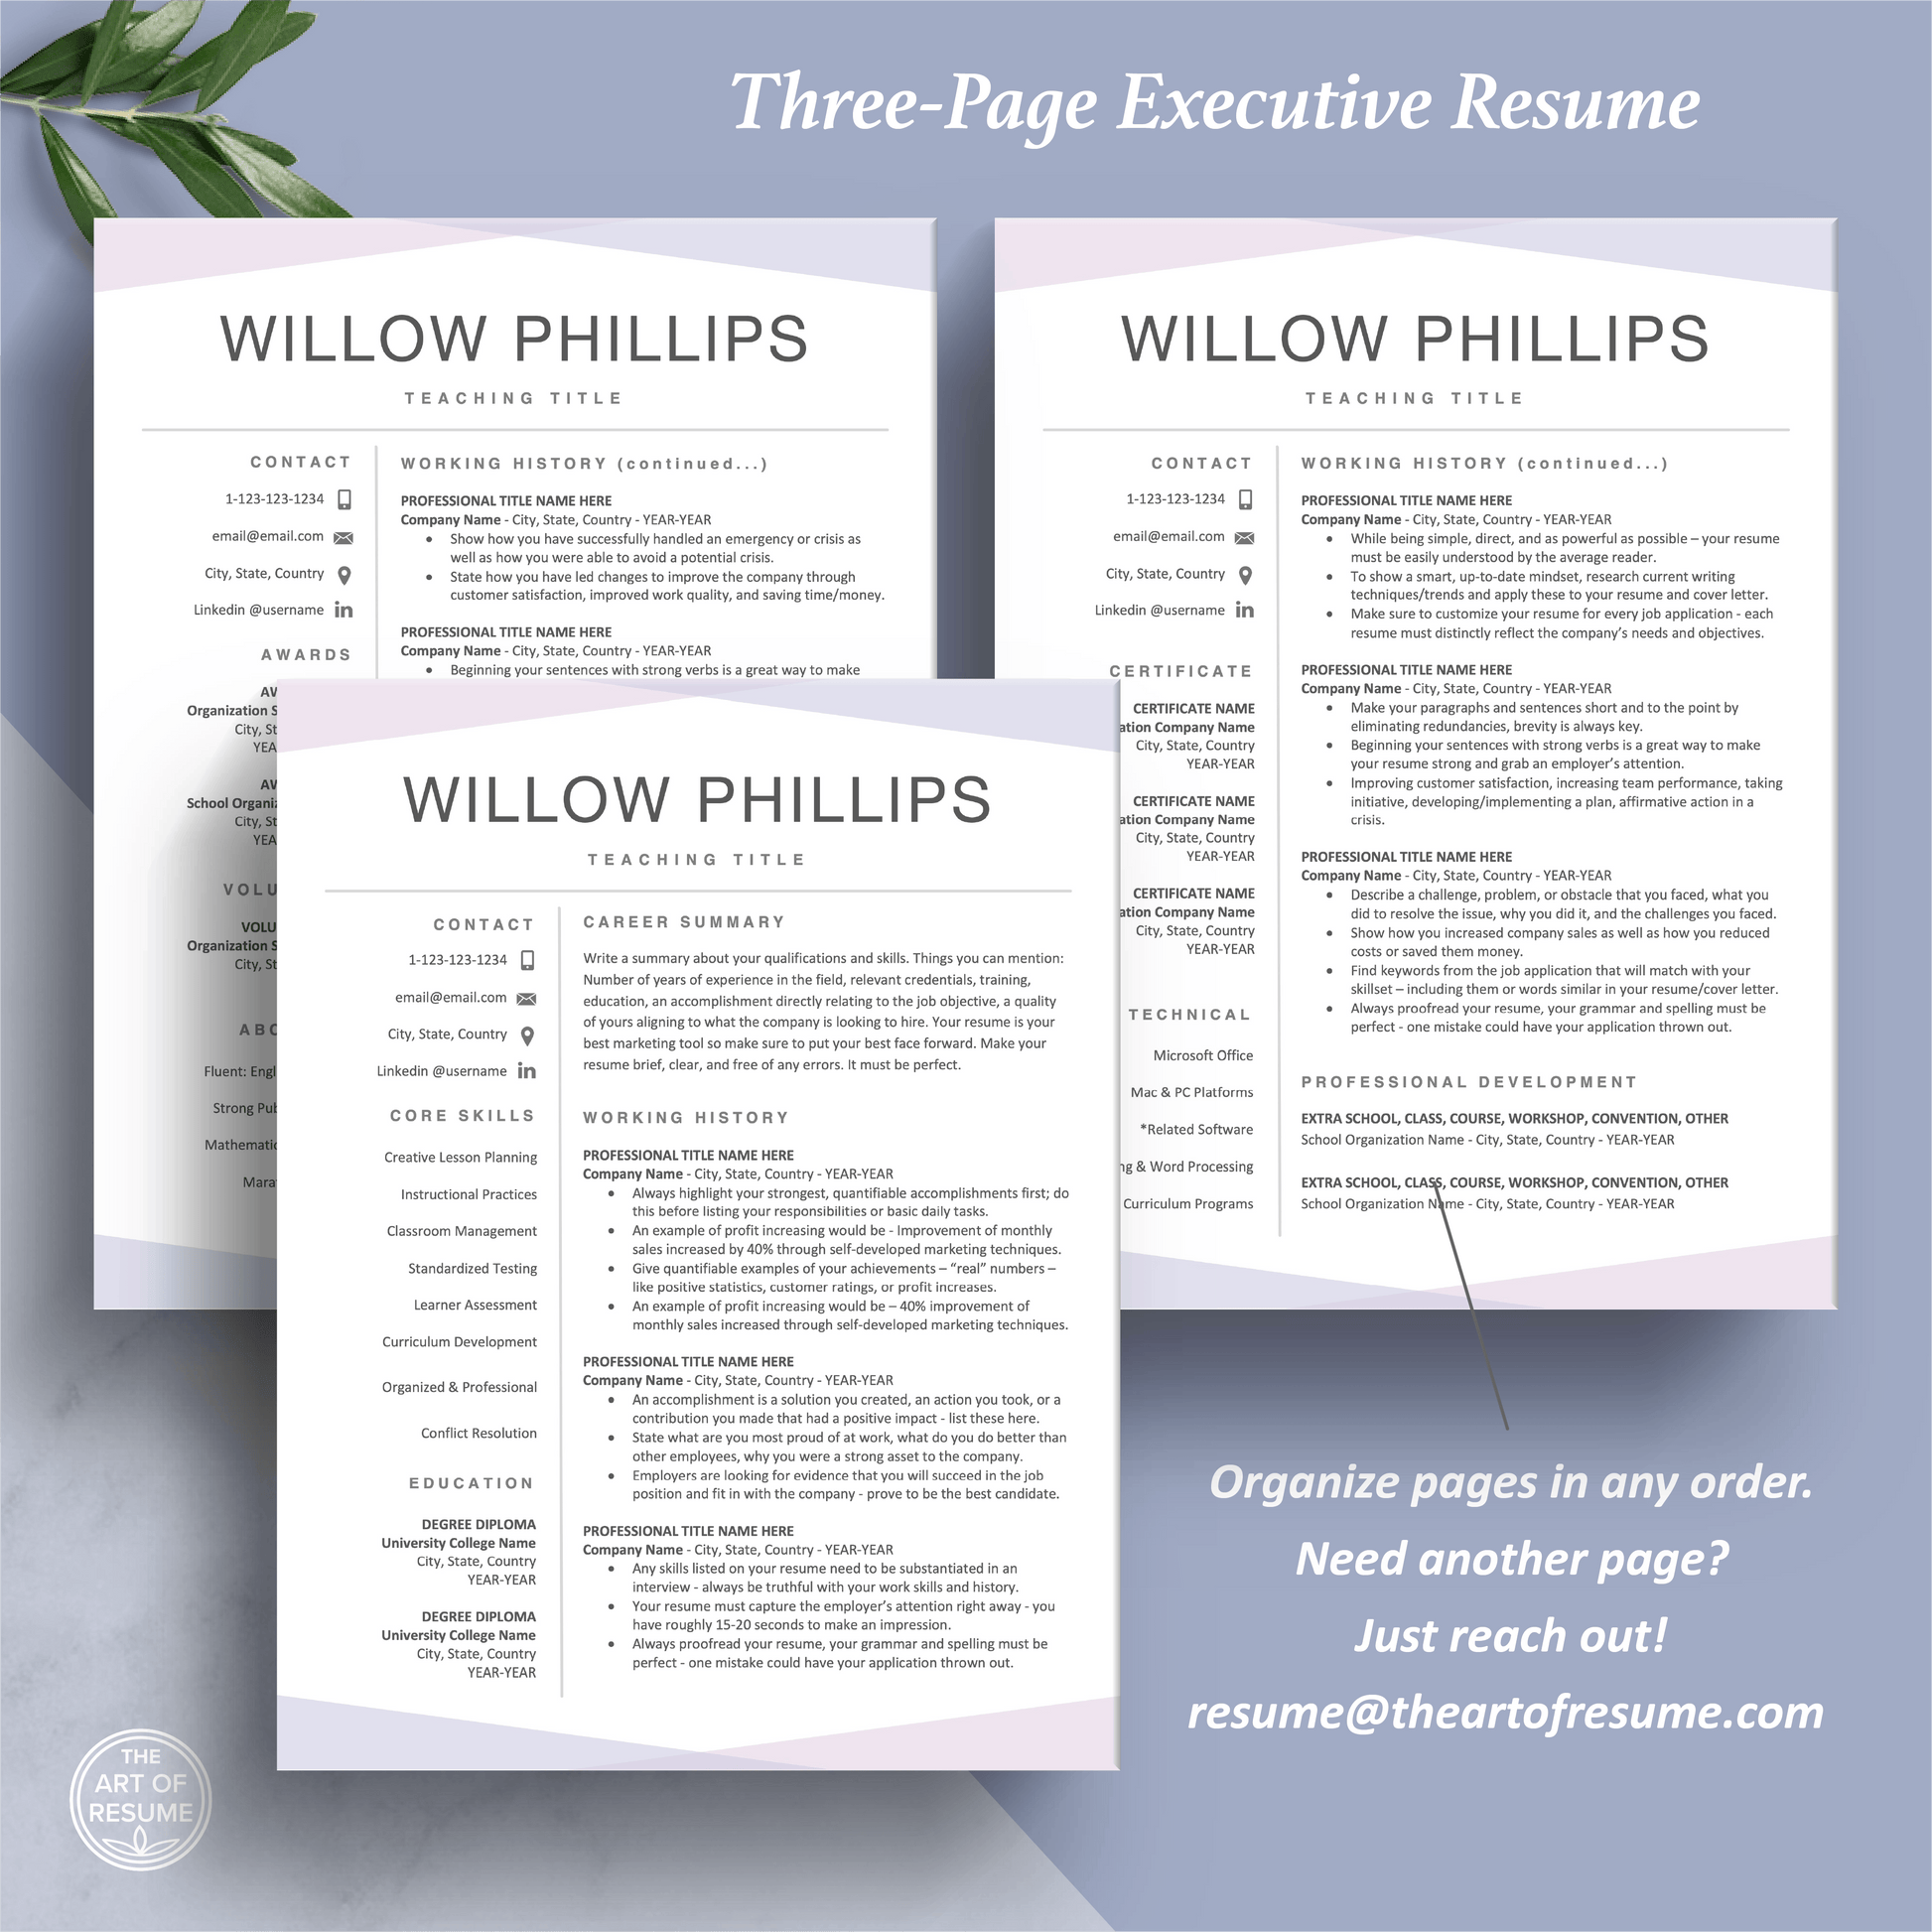 Resume Template Maker | Fully Editable Resume Template | Executive CV Download - The Art of Resume